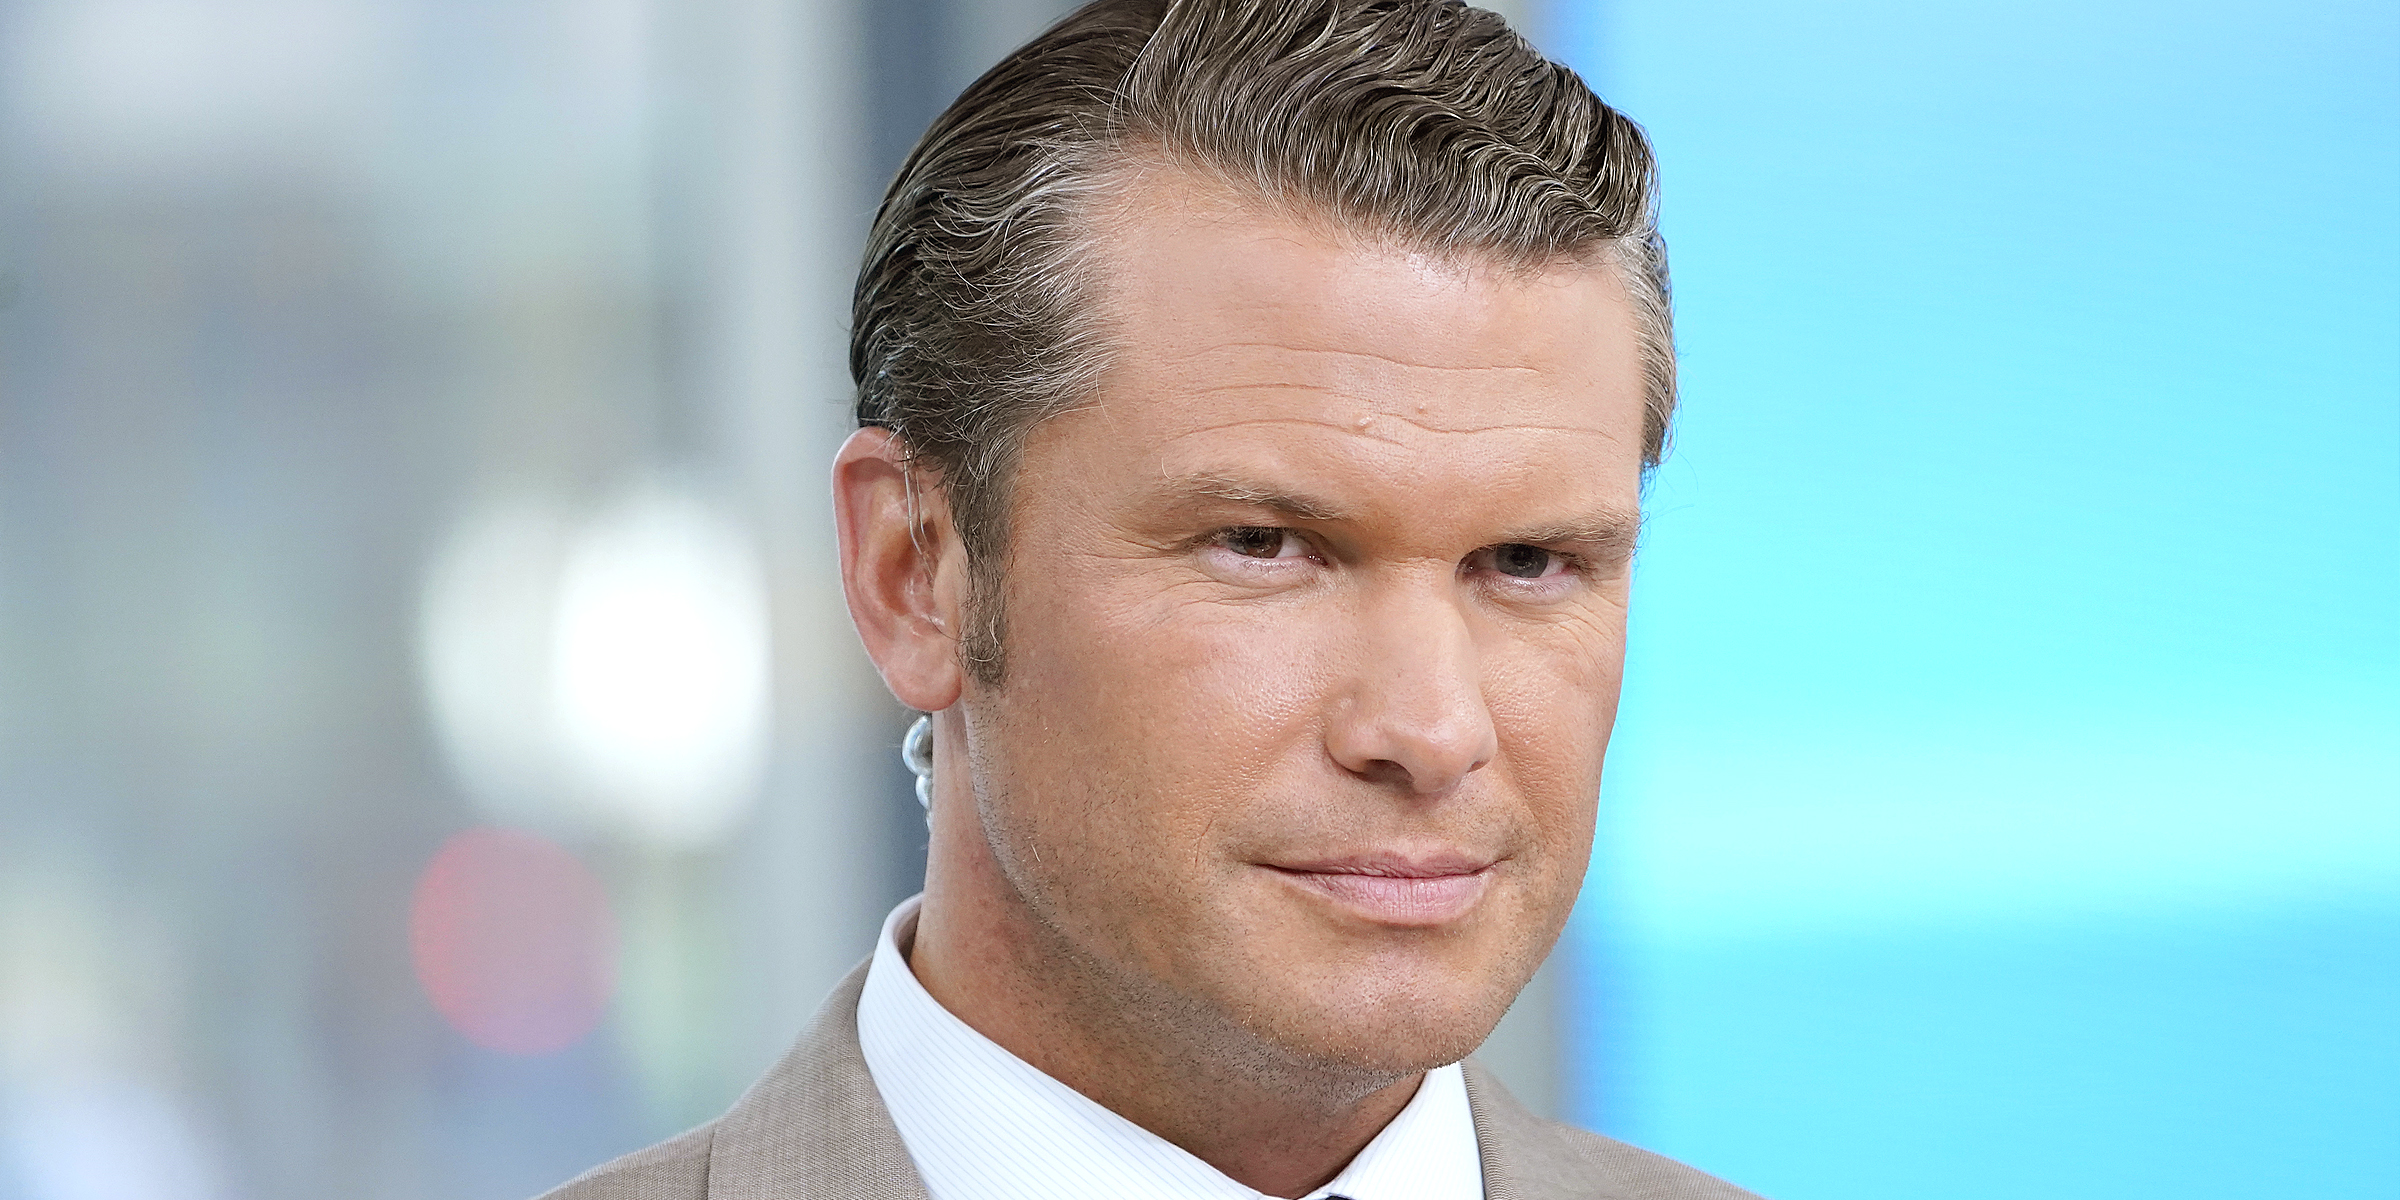 Pete Hegseth | Source: Getty Images